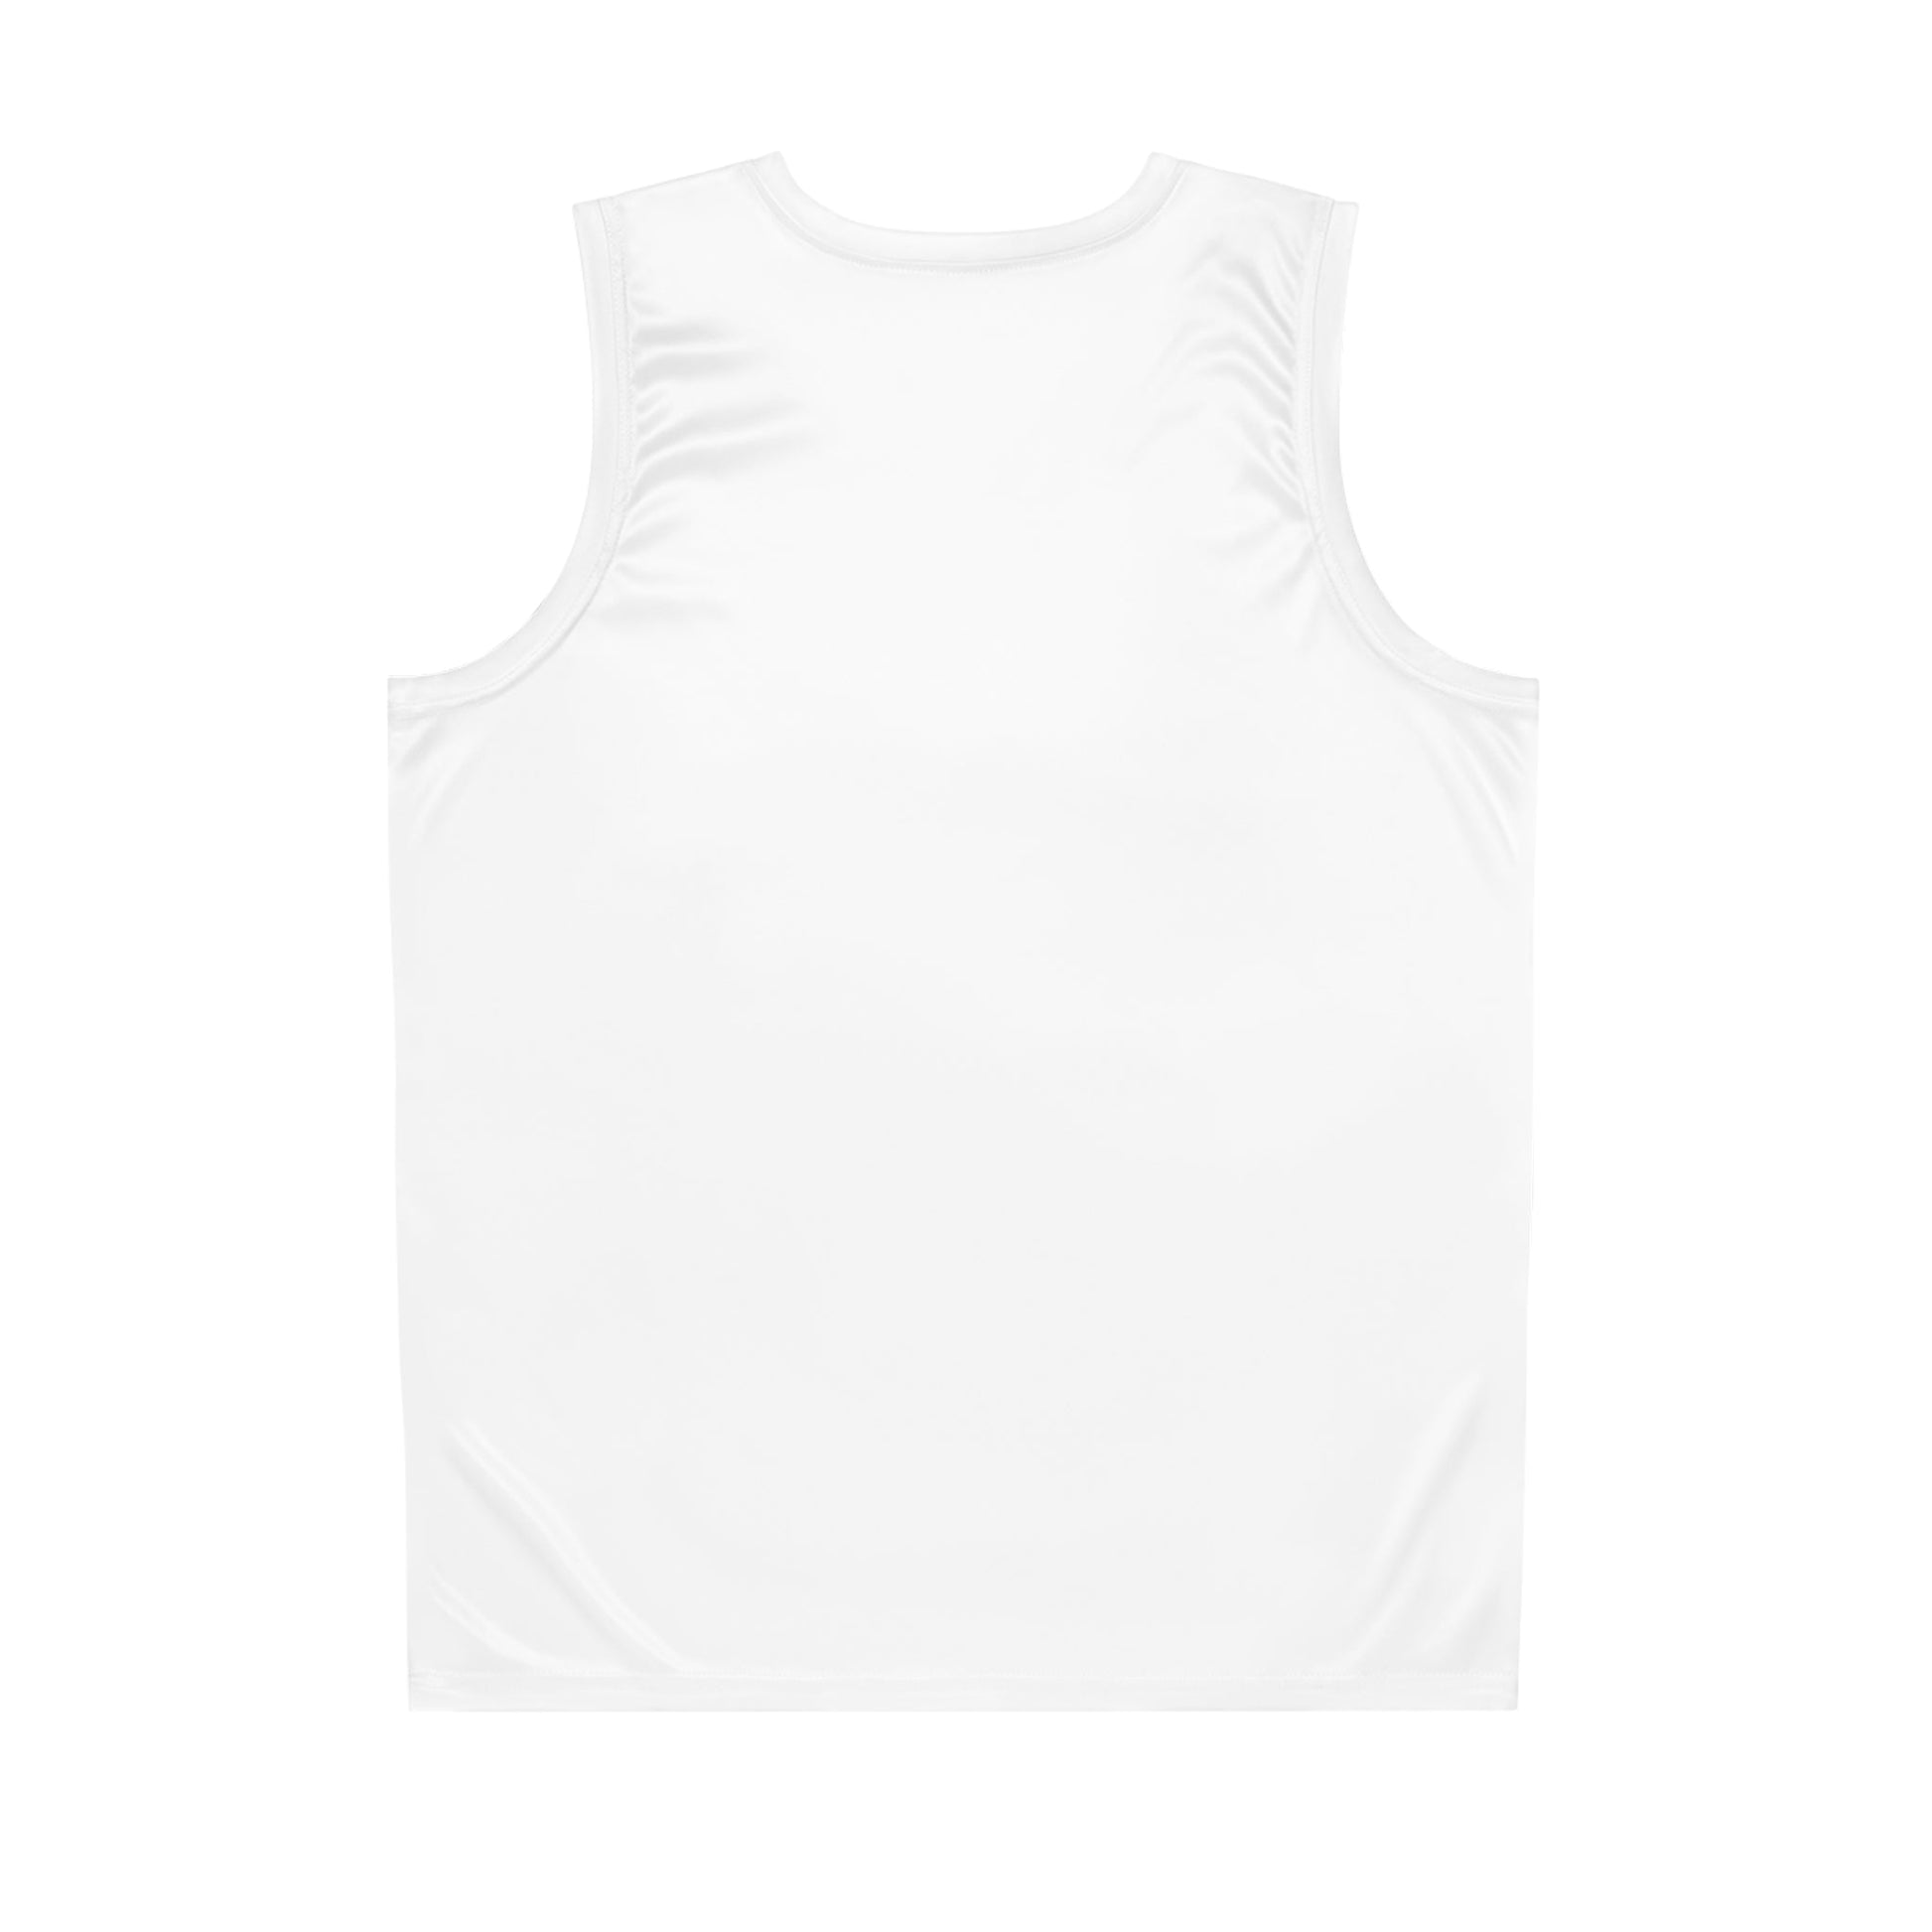 Basketball Jersey (AOP) - lavco